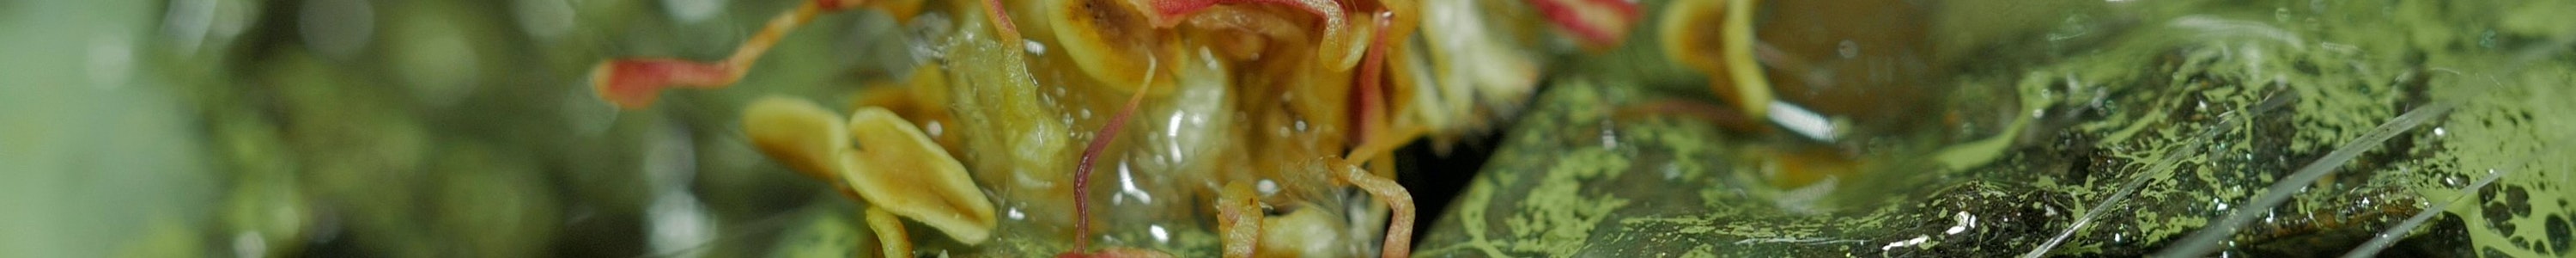 A peach coloured flower pollen-like form sits within a toxic acid-green environment. The image is very textural, wet and gooey.